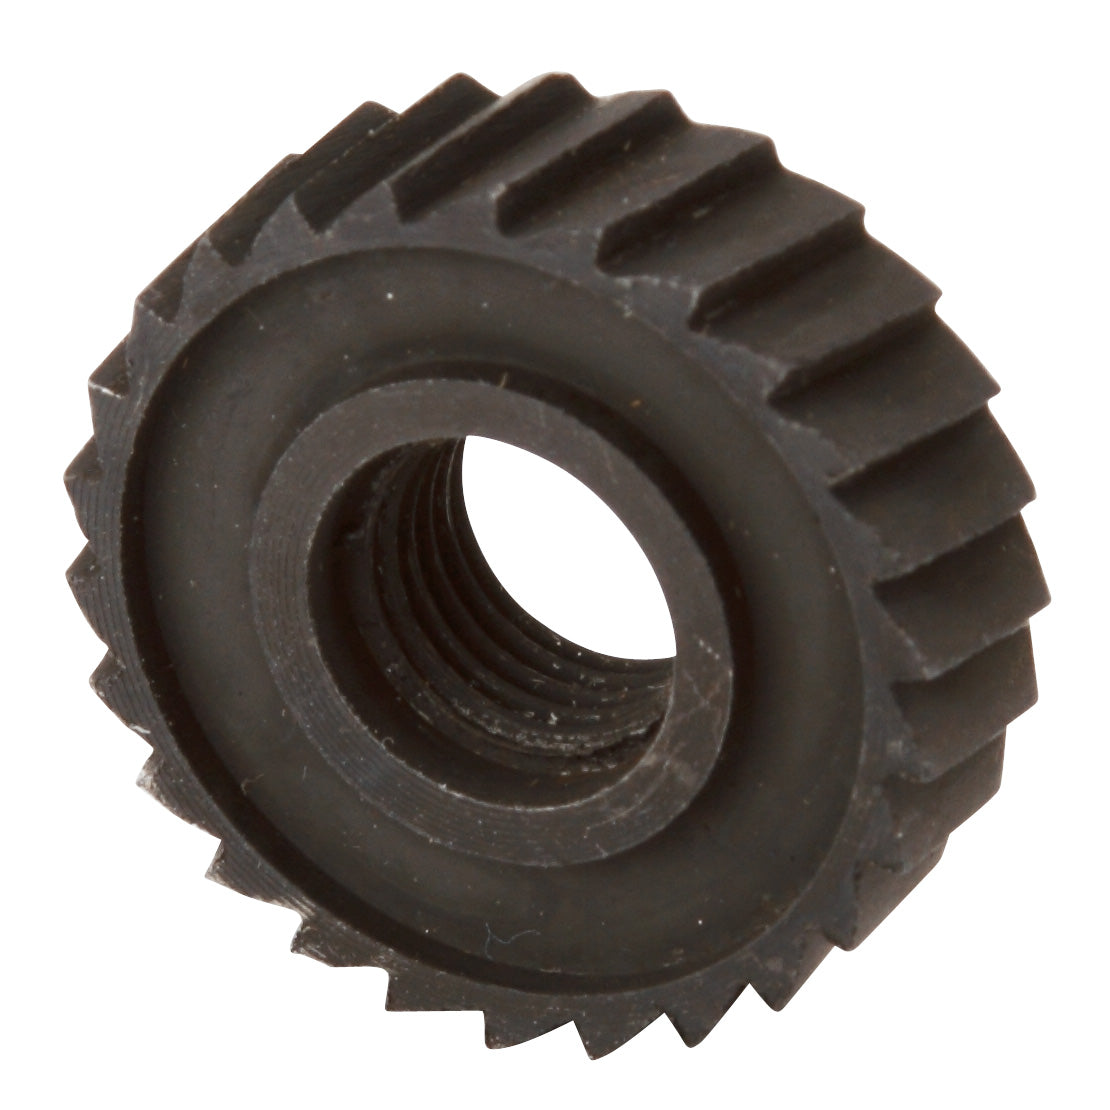 Royal Industries (ROY CO 2 G) Replacement CO 2 Gear